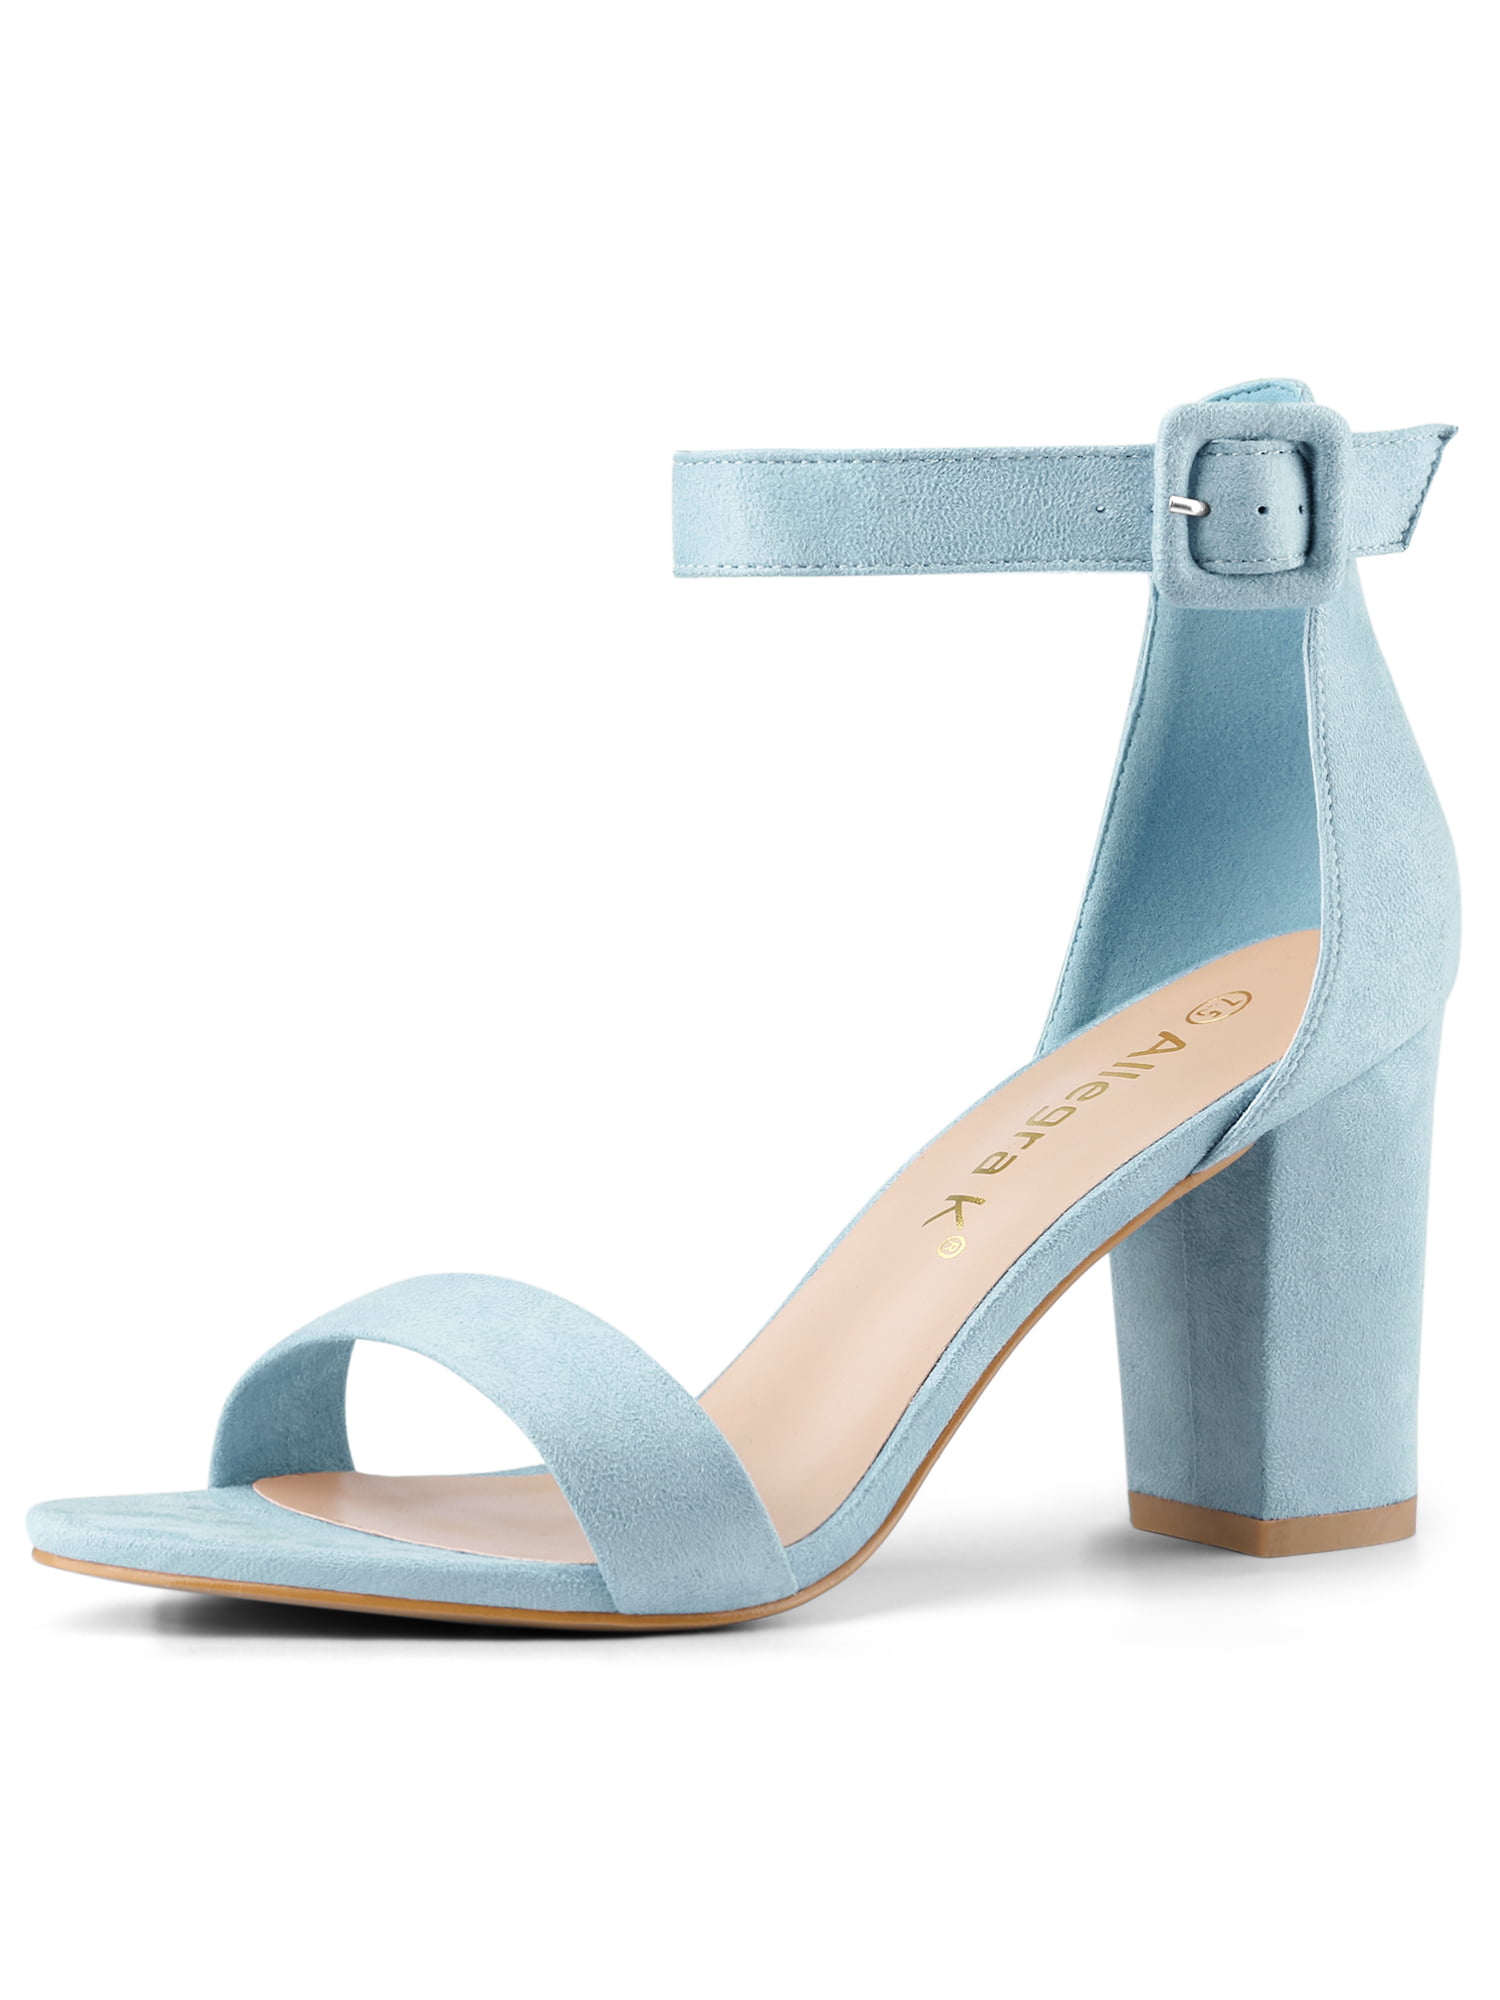 light blue heels with ankle strap